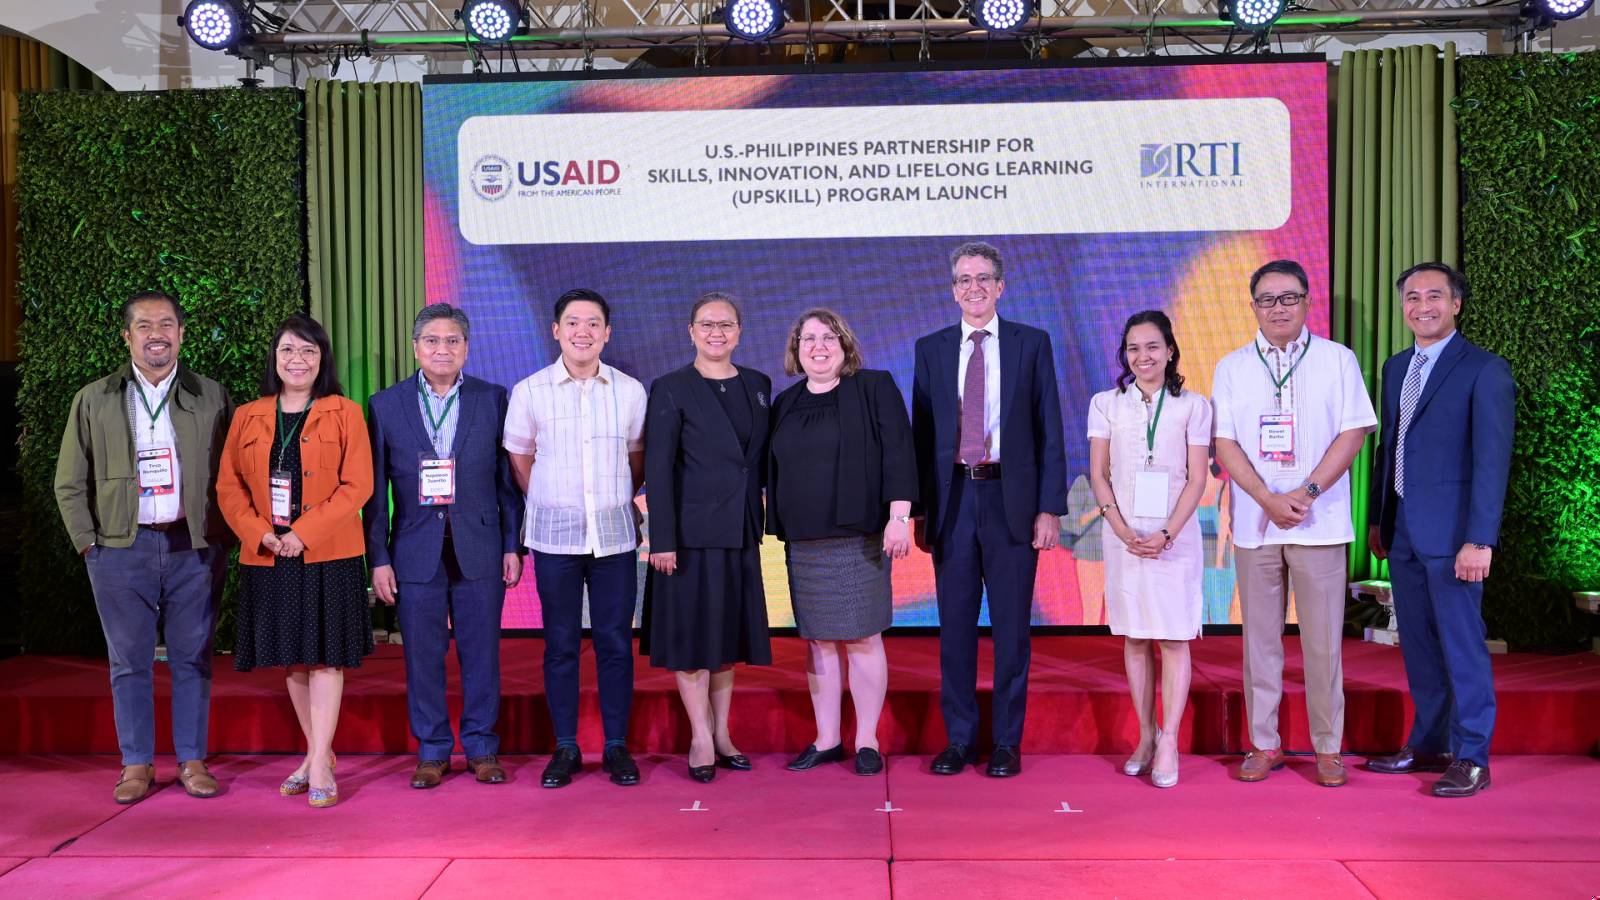 U.S. launches Php 1.6-Billion UPSKILL Program for PH higher education